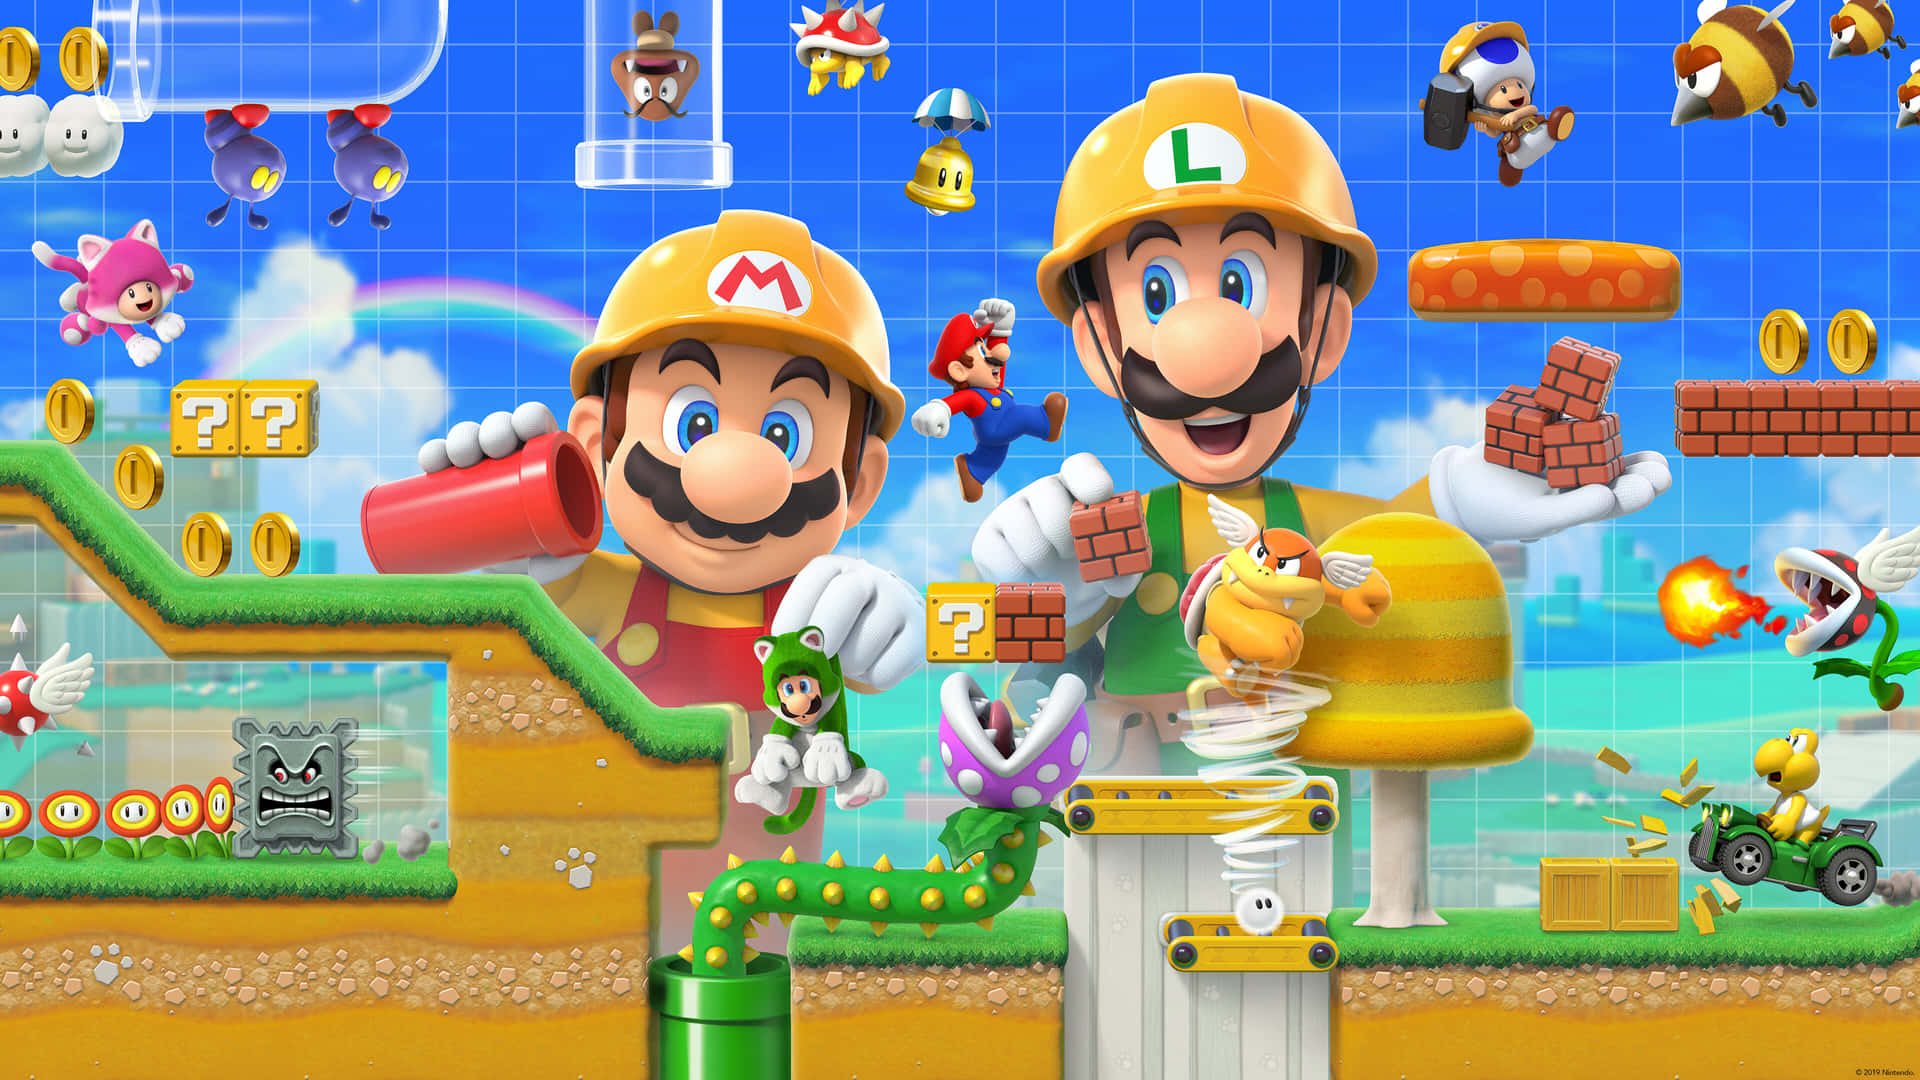 “The cool and stylish Mario is overtaking the gaming world!” Wallpaper